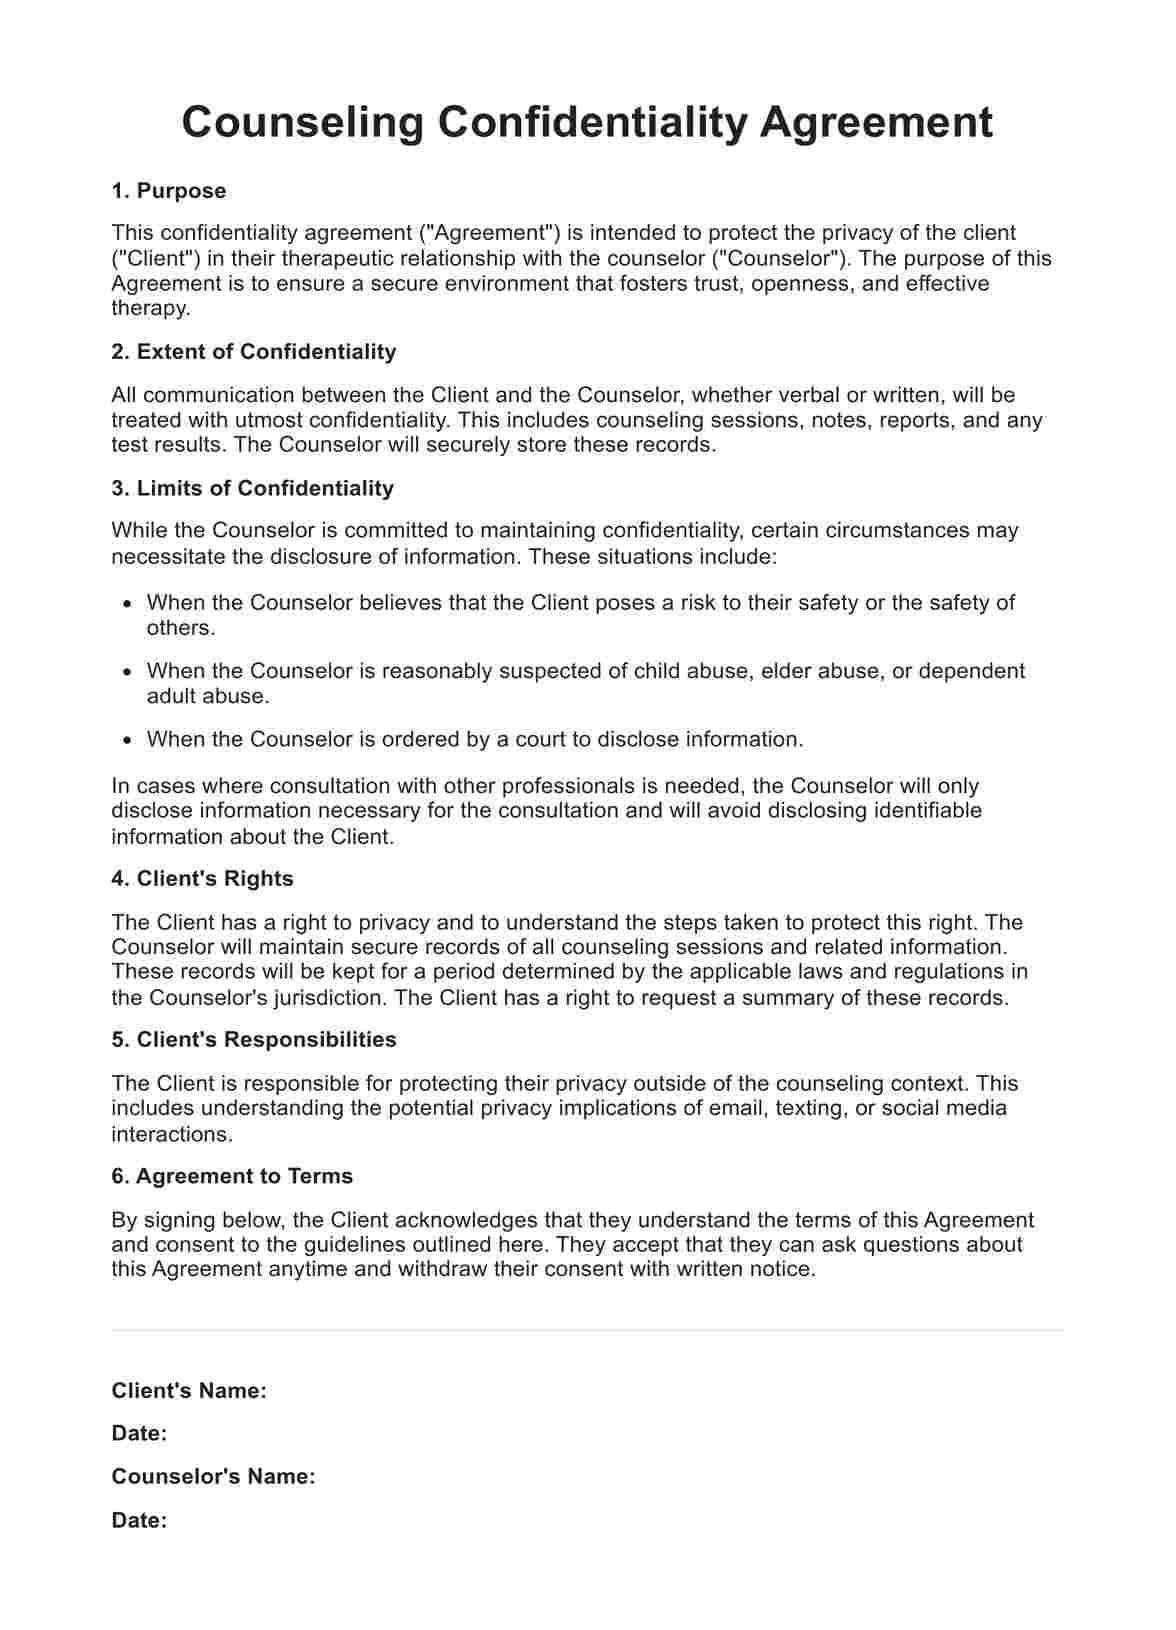 Counseling Confidentiality Agreements PDF Example